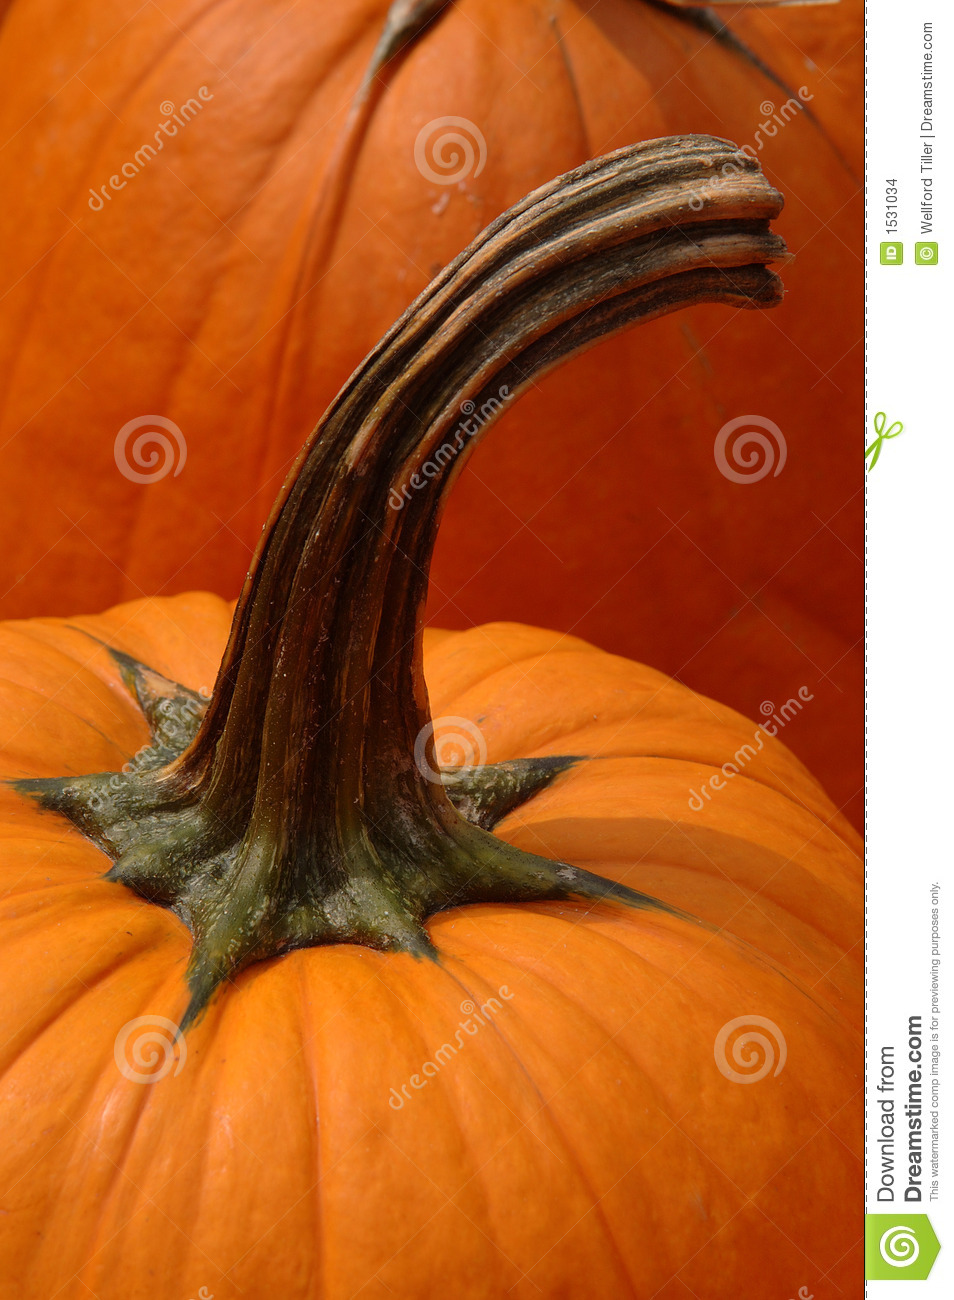 Close Up Of Pumpkin Stem With Another Pumpkin In The Background